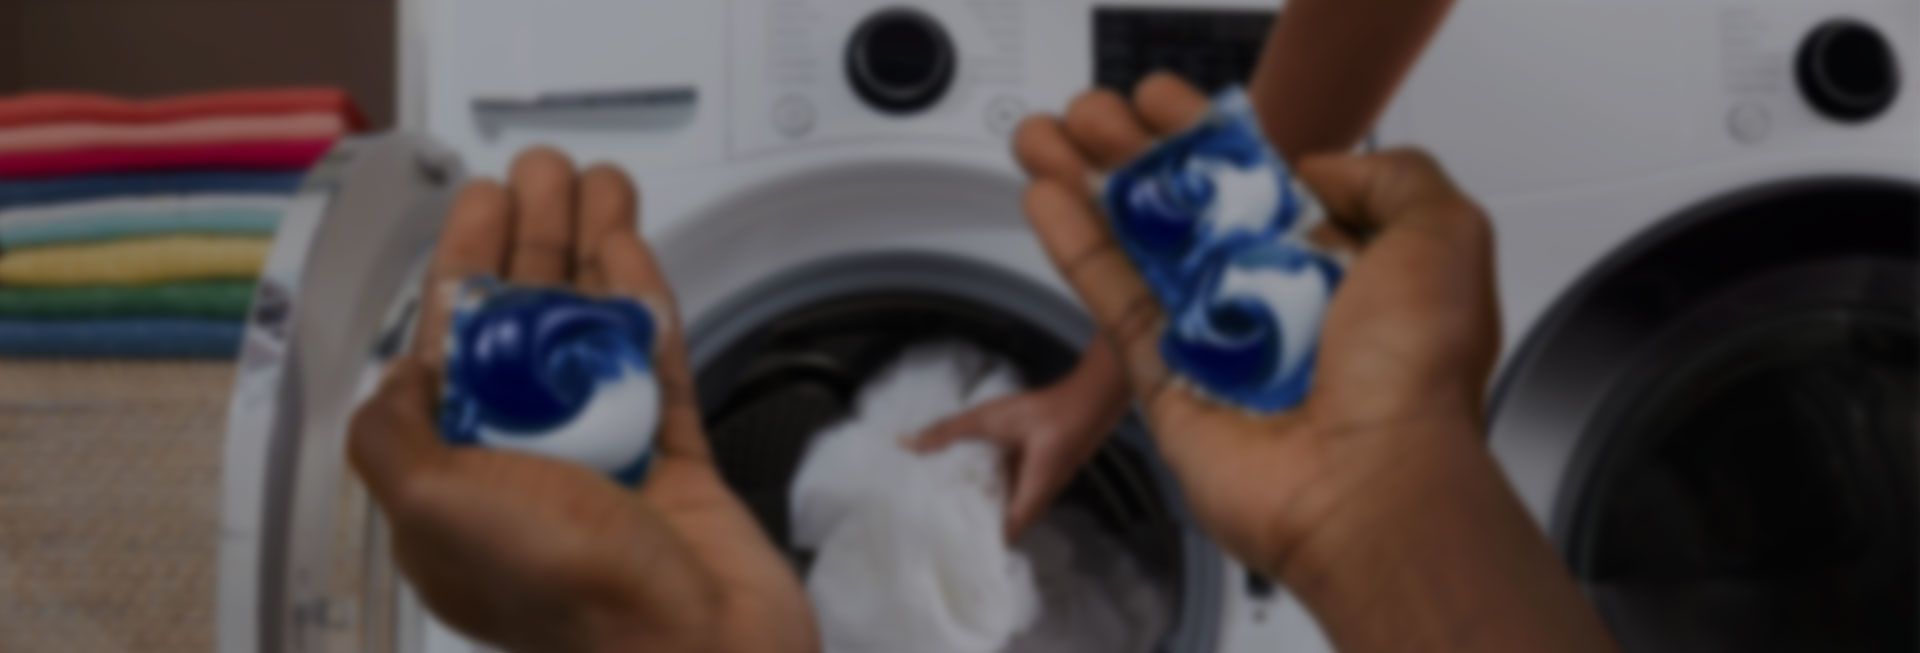 A person holding Tide PODS washing capsules